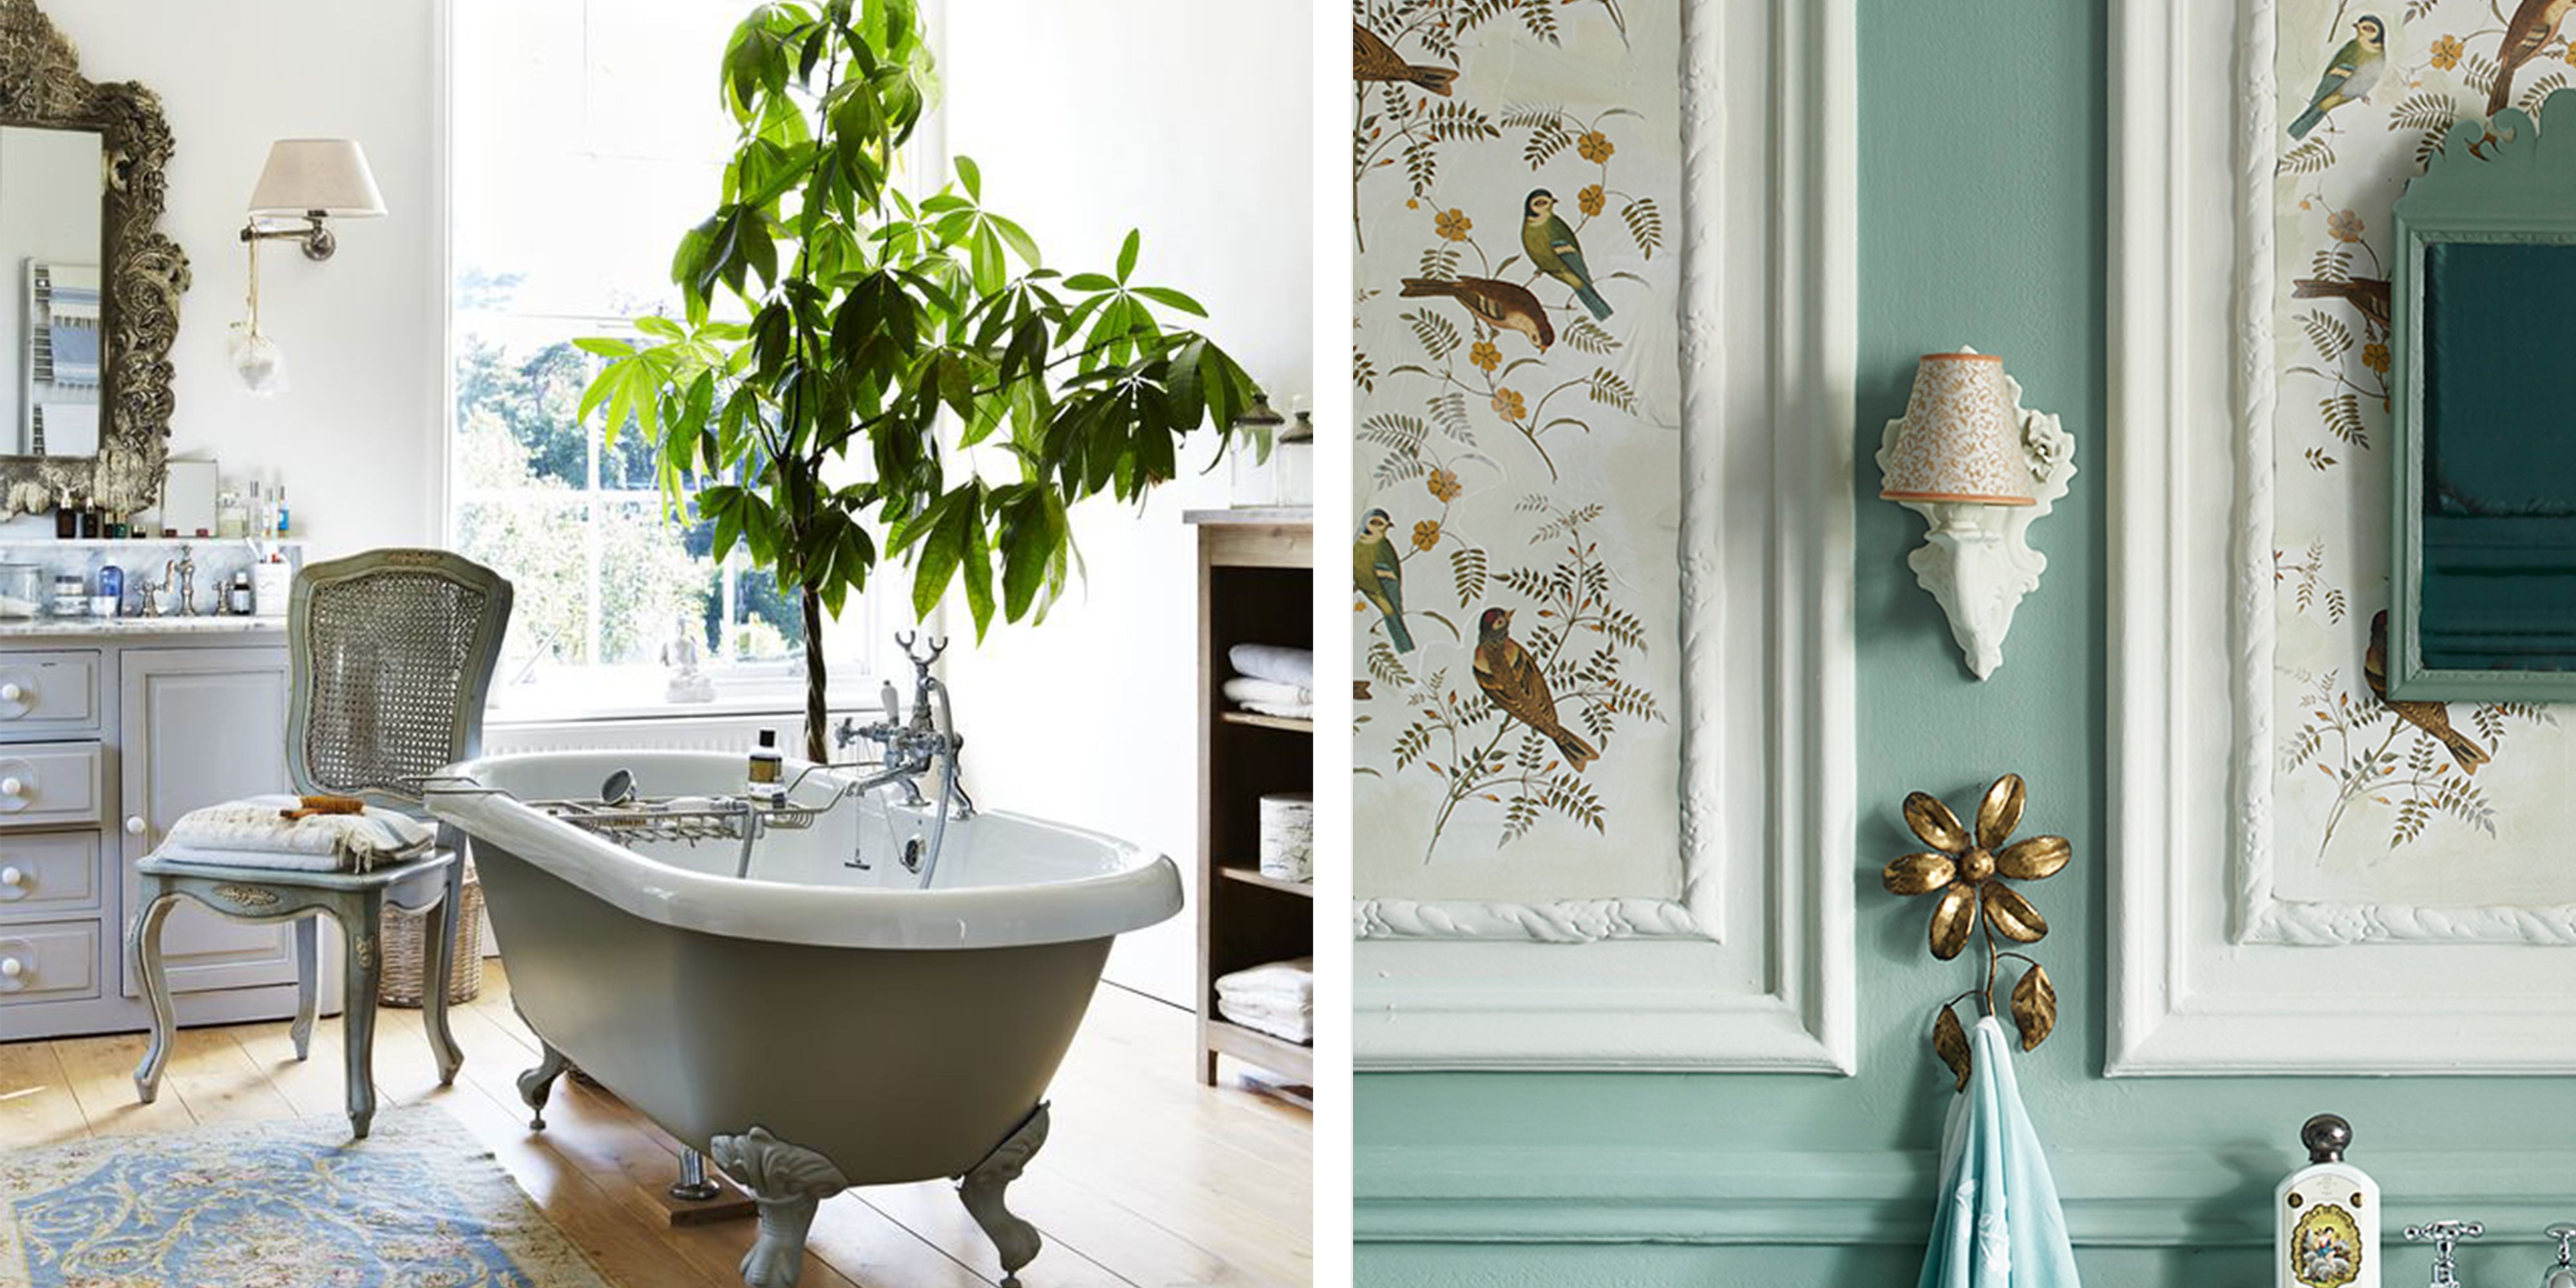 6 On Trend Design Ideas for Bathrooms for Any Size